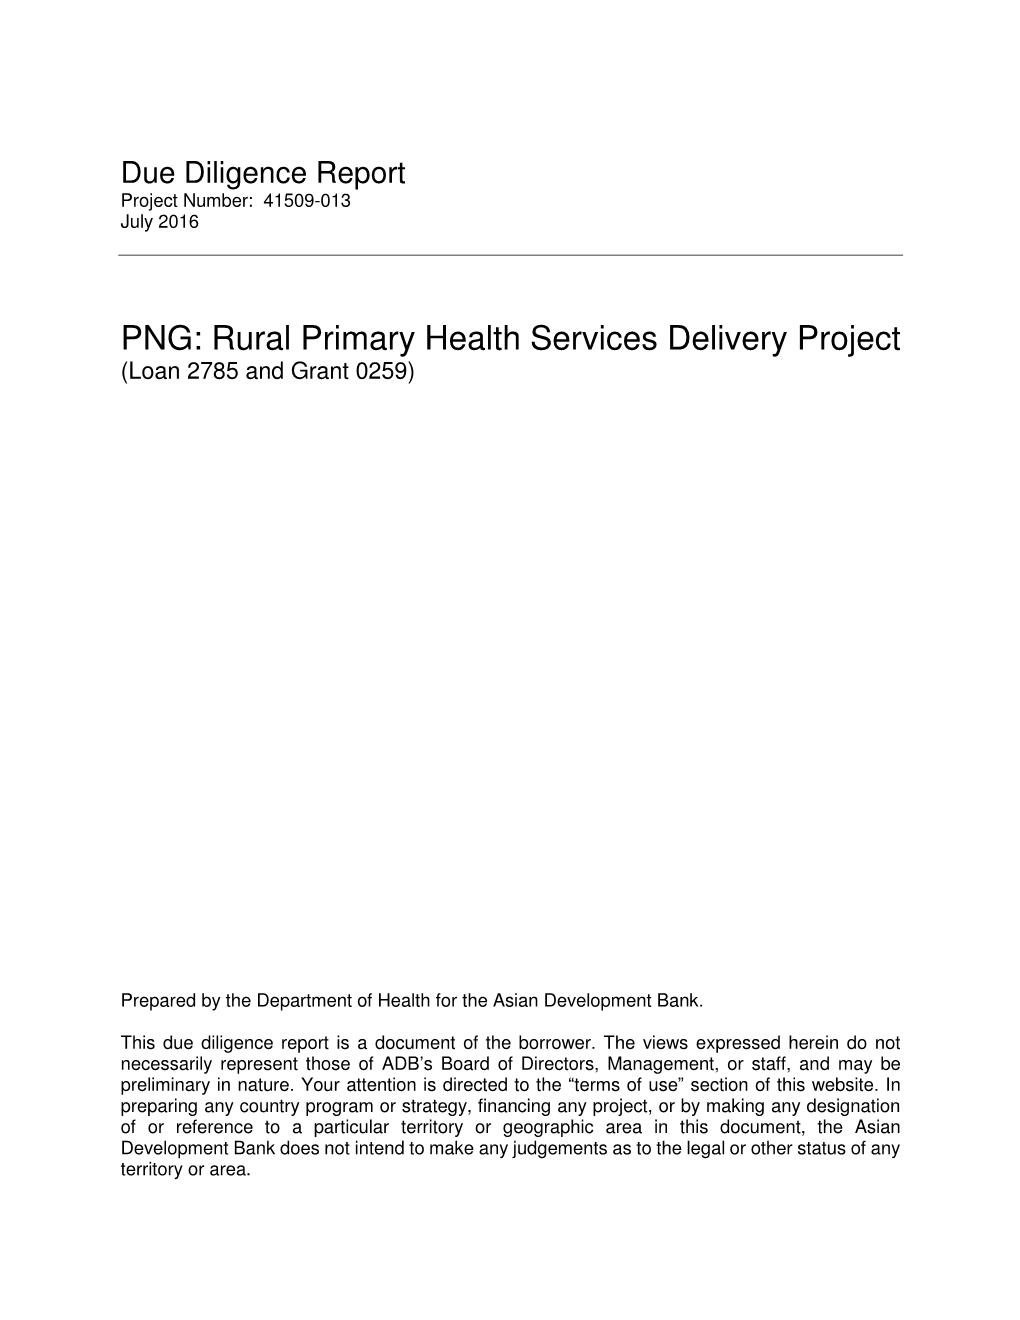 PNG: Rural Primary Health Services Delivery Project (Loan 2785 and Grant 0259)